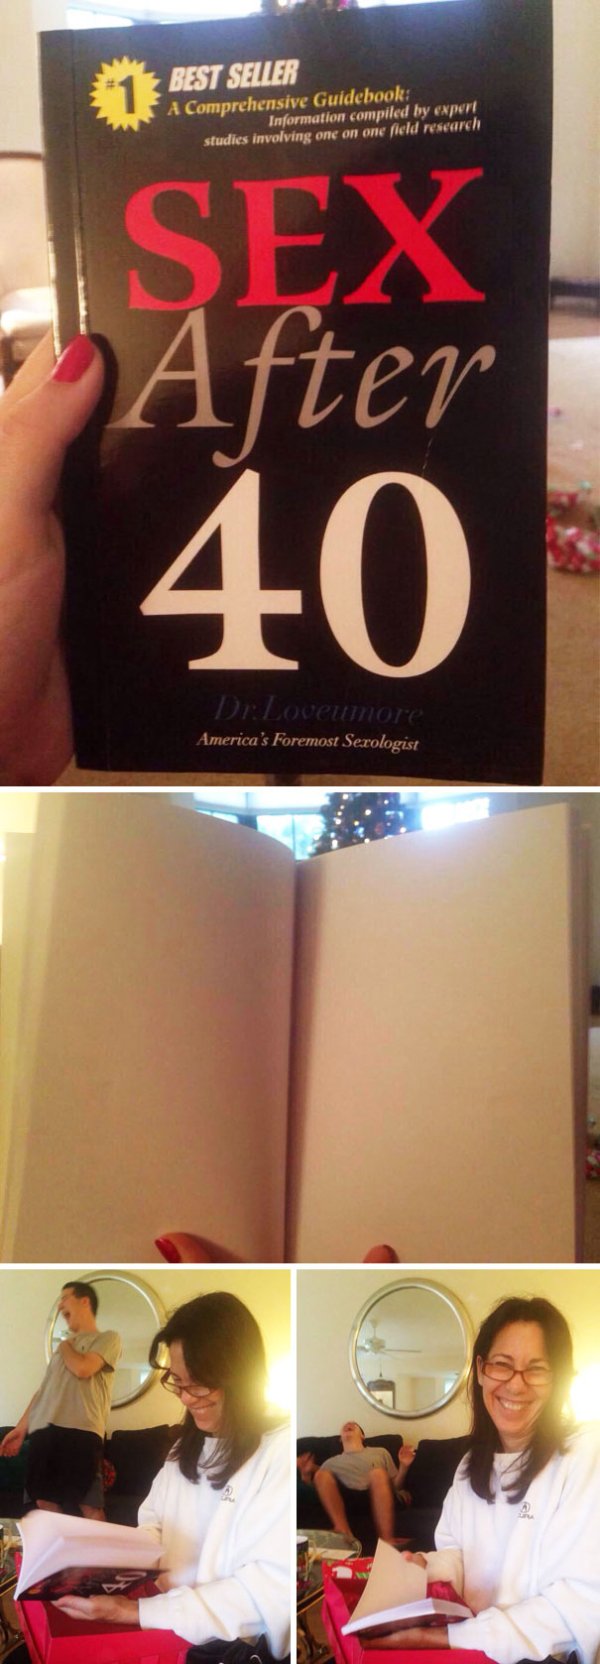 “I got my parents a present for their anniversary. My dad got a kick out of it.”